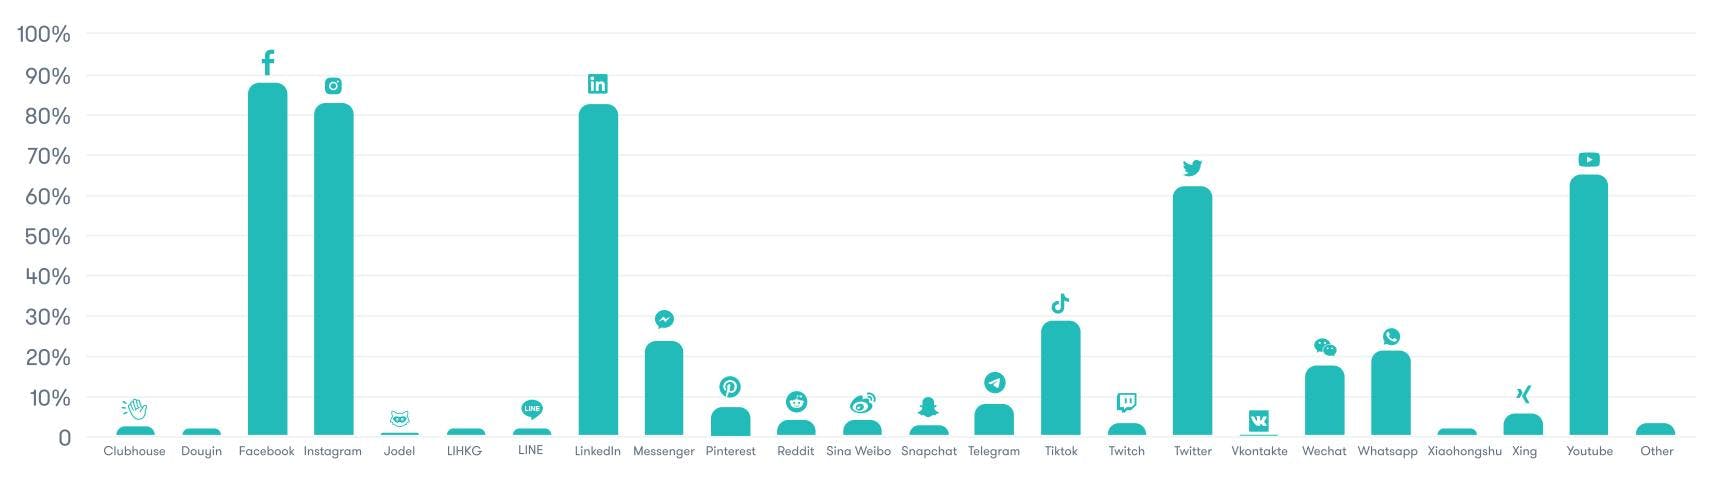 Top social media channels by usage rate